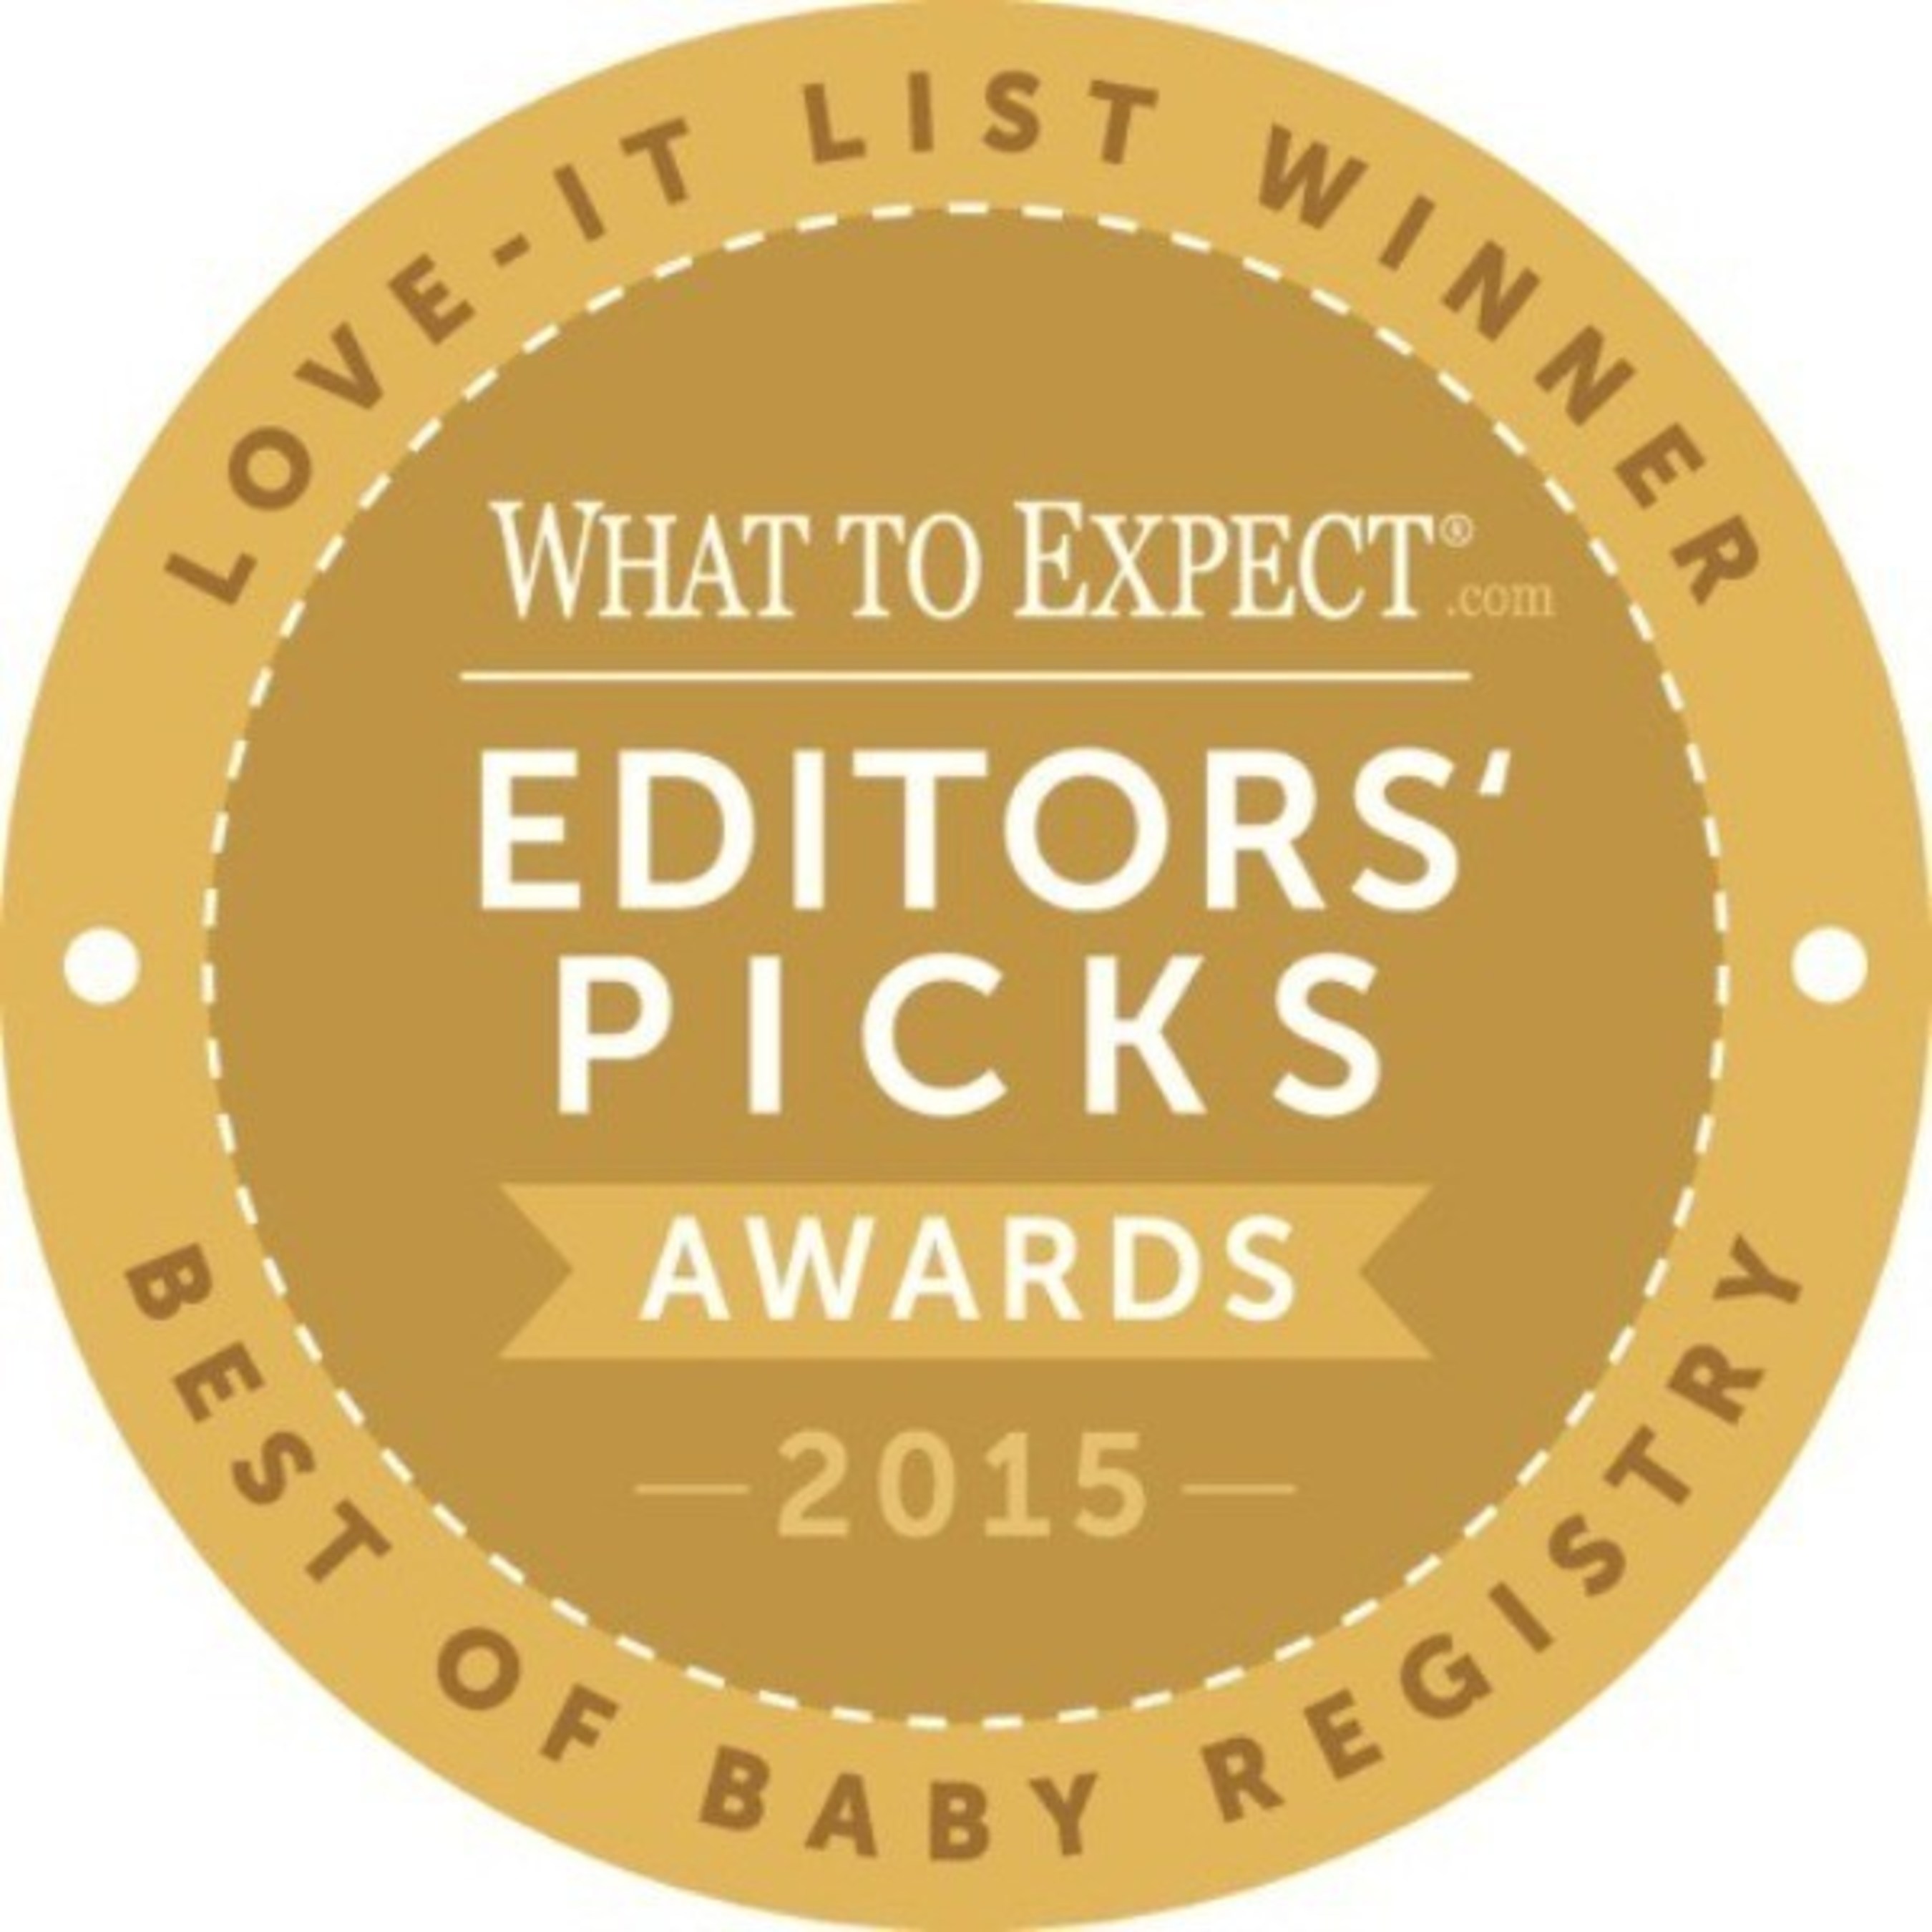 WhatToExpect.com Awards the Best Baby Registry Products.